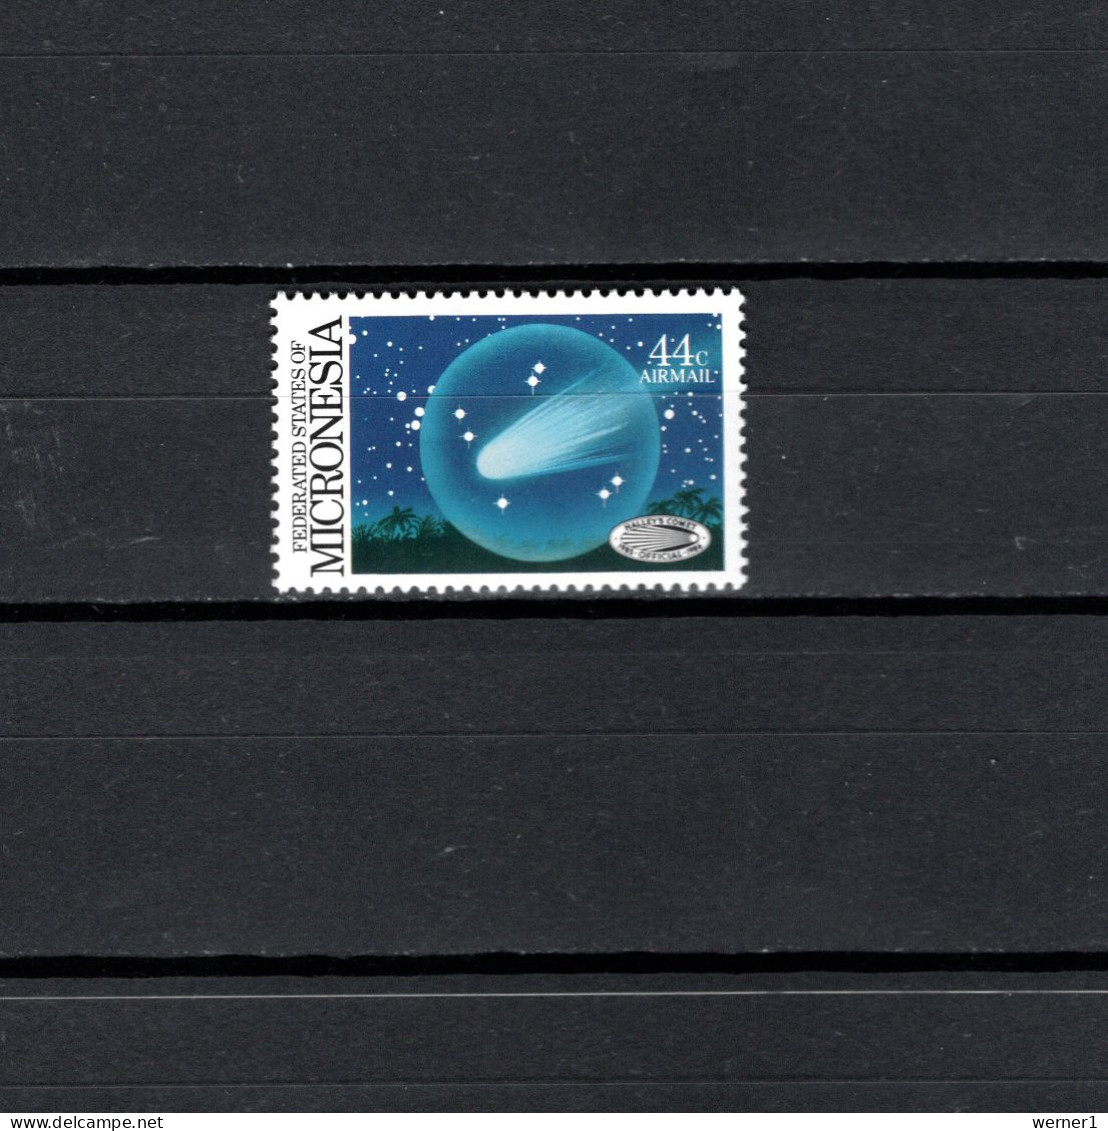 Micronesia 1986 Space, Halley's Comet Stamp MNH - Ozeanien